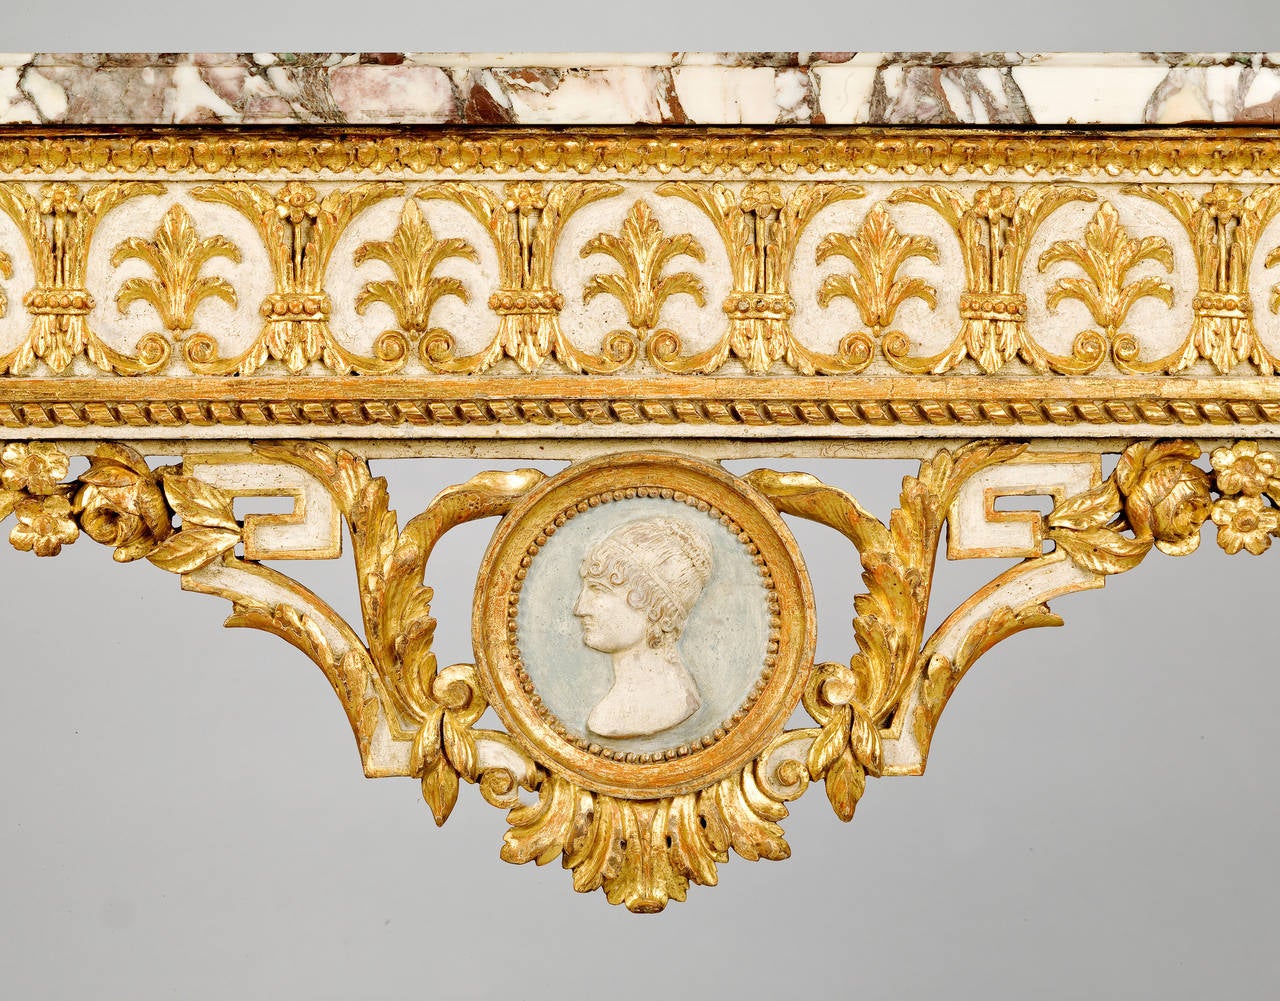 An unusual, fine quality late 18th century Piedmontese parcel-gilt side table. The frieze is decorated with enclosed anthemia and at the centre there is suspended a carved profile portrait of a young lady supported by a key pattern surrounded by